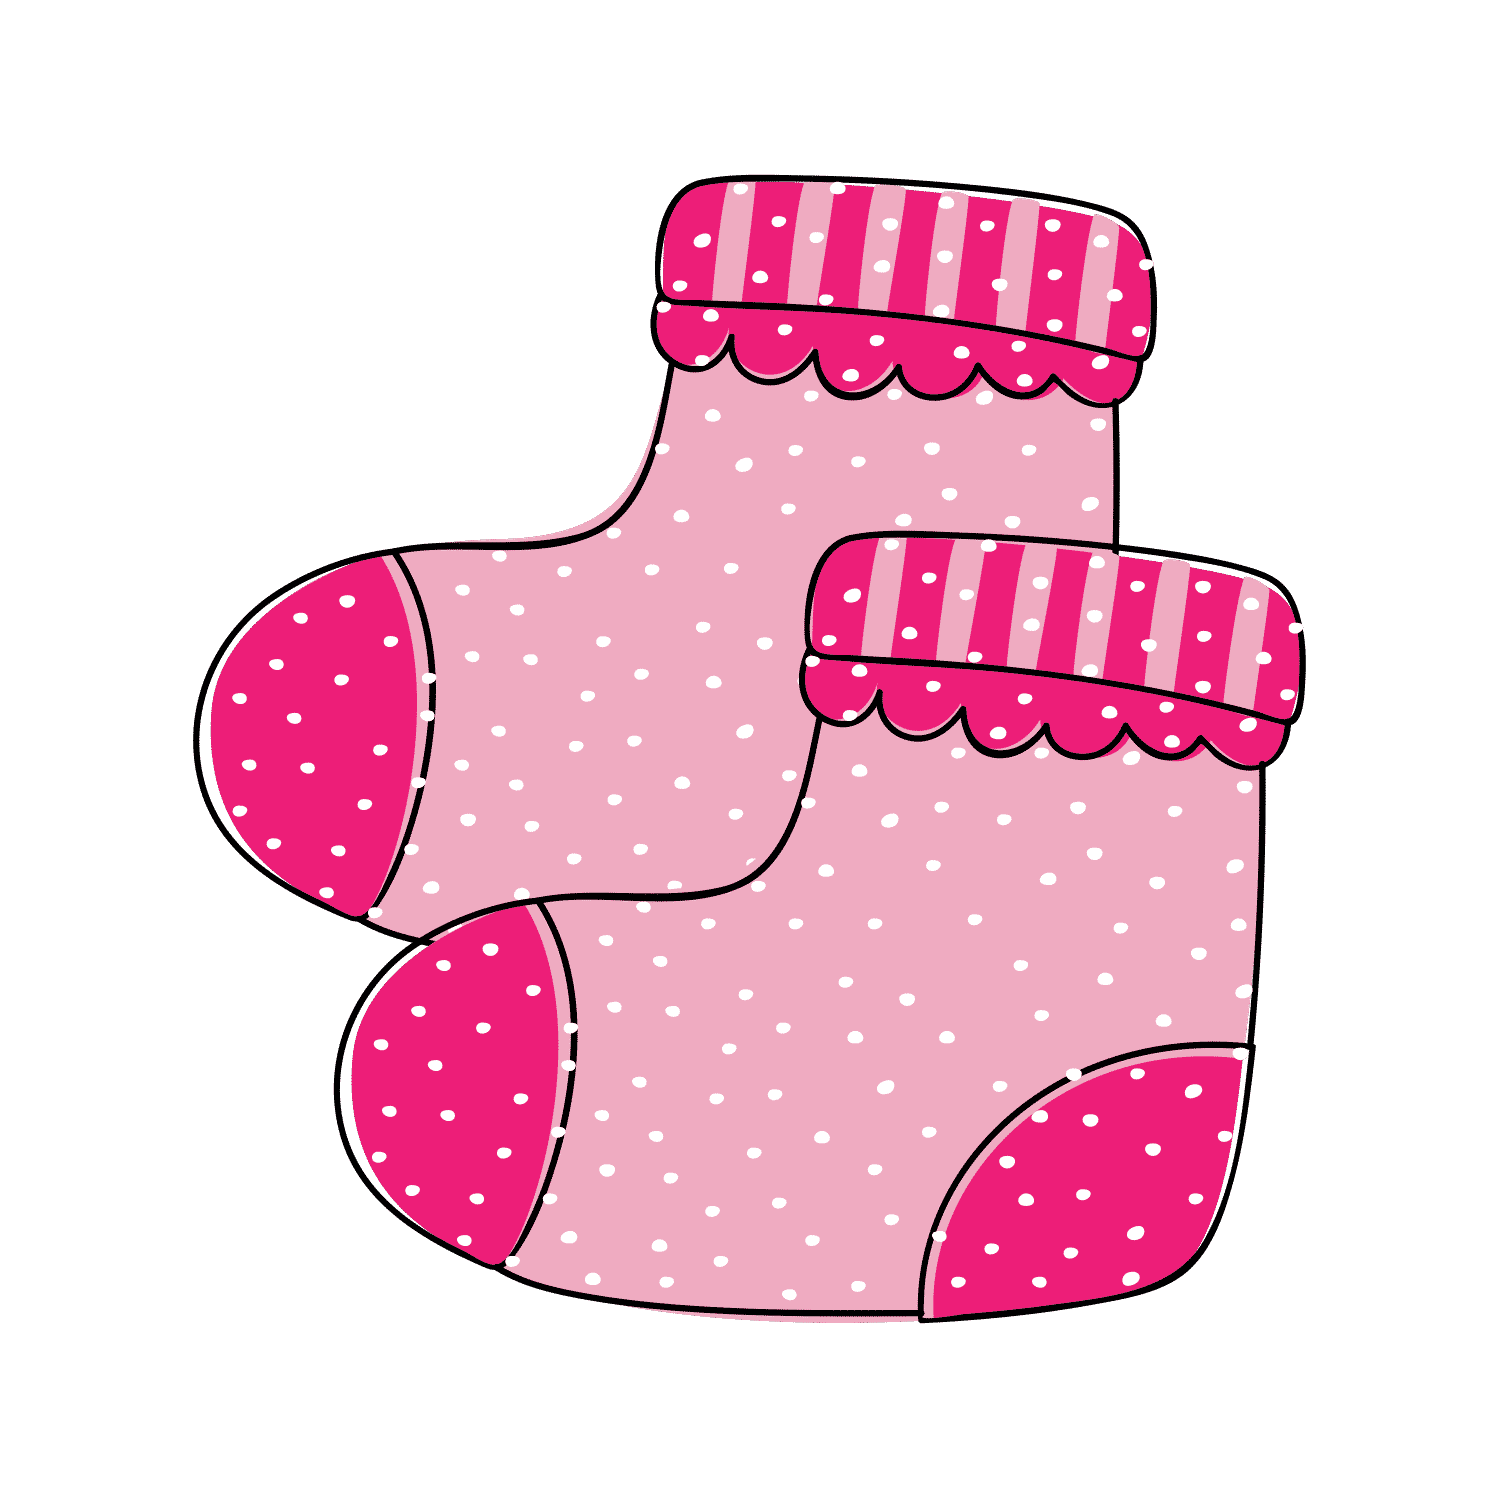 Watercolour Baby clip art, new baby socks illustration clipart digital  download, PNG and JPG, scrapbooking clip art commercial use